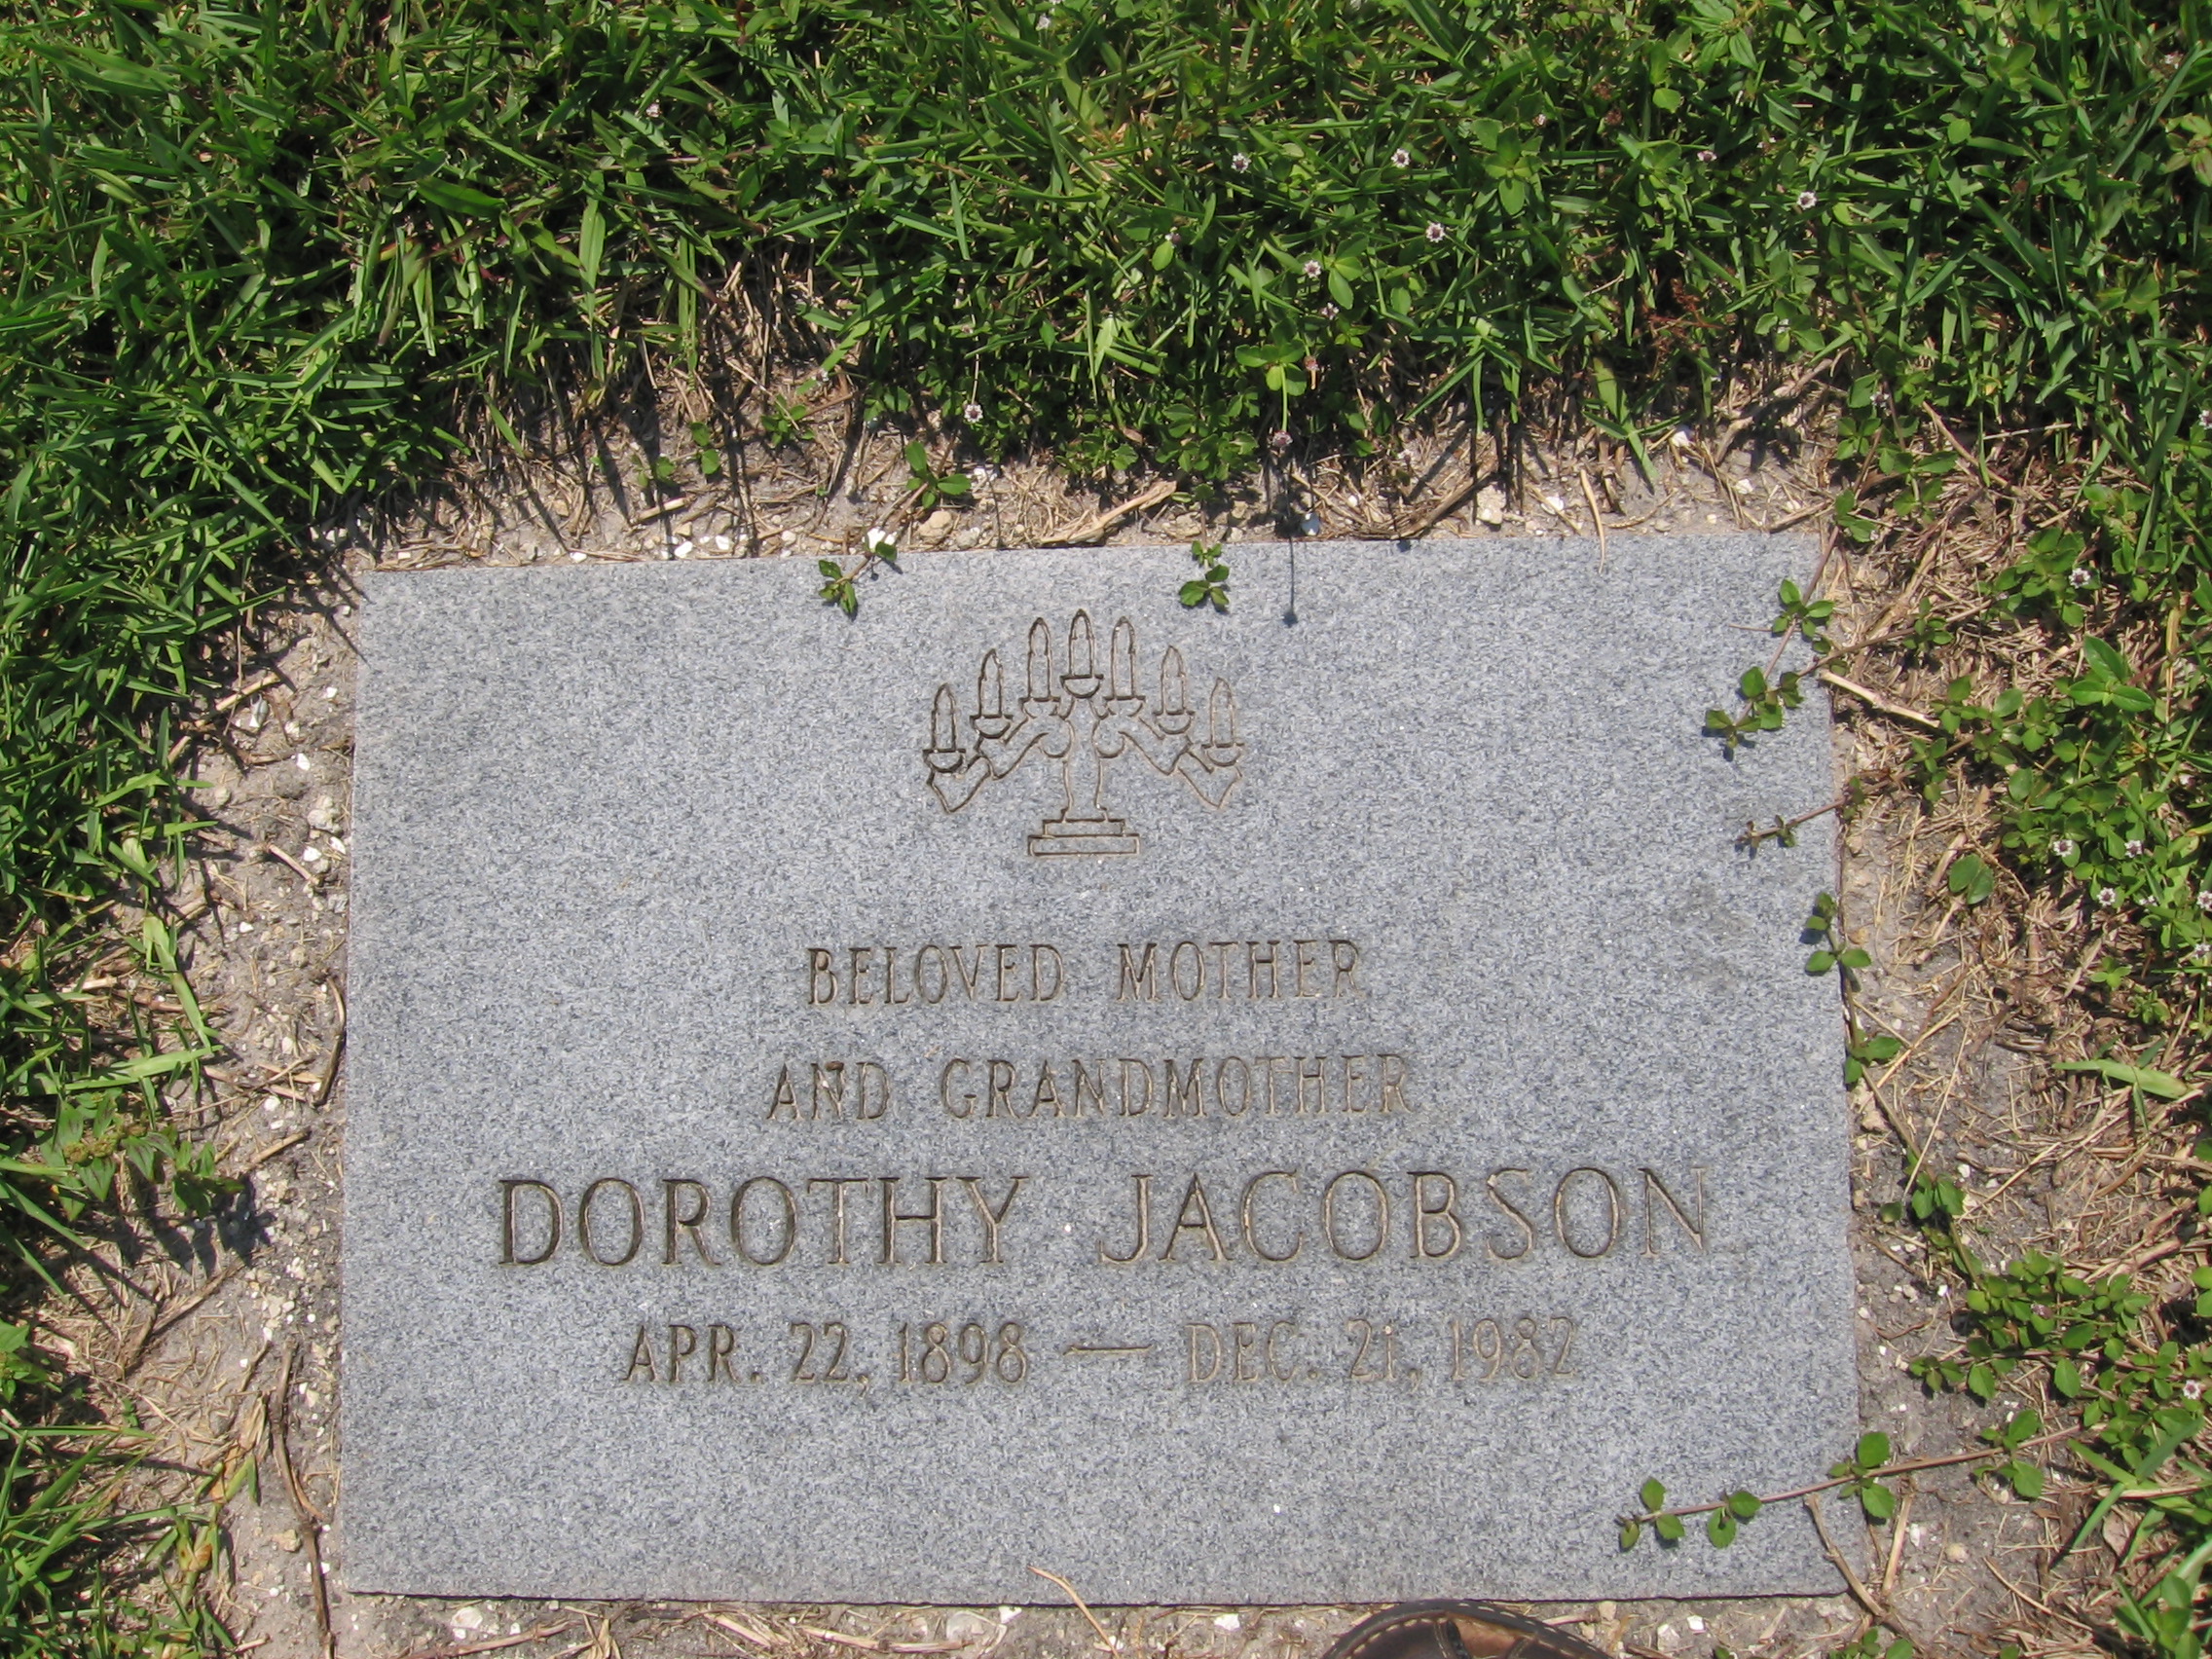 Dorothy Jacobson